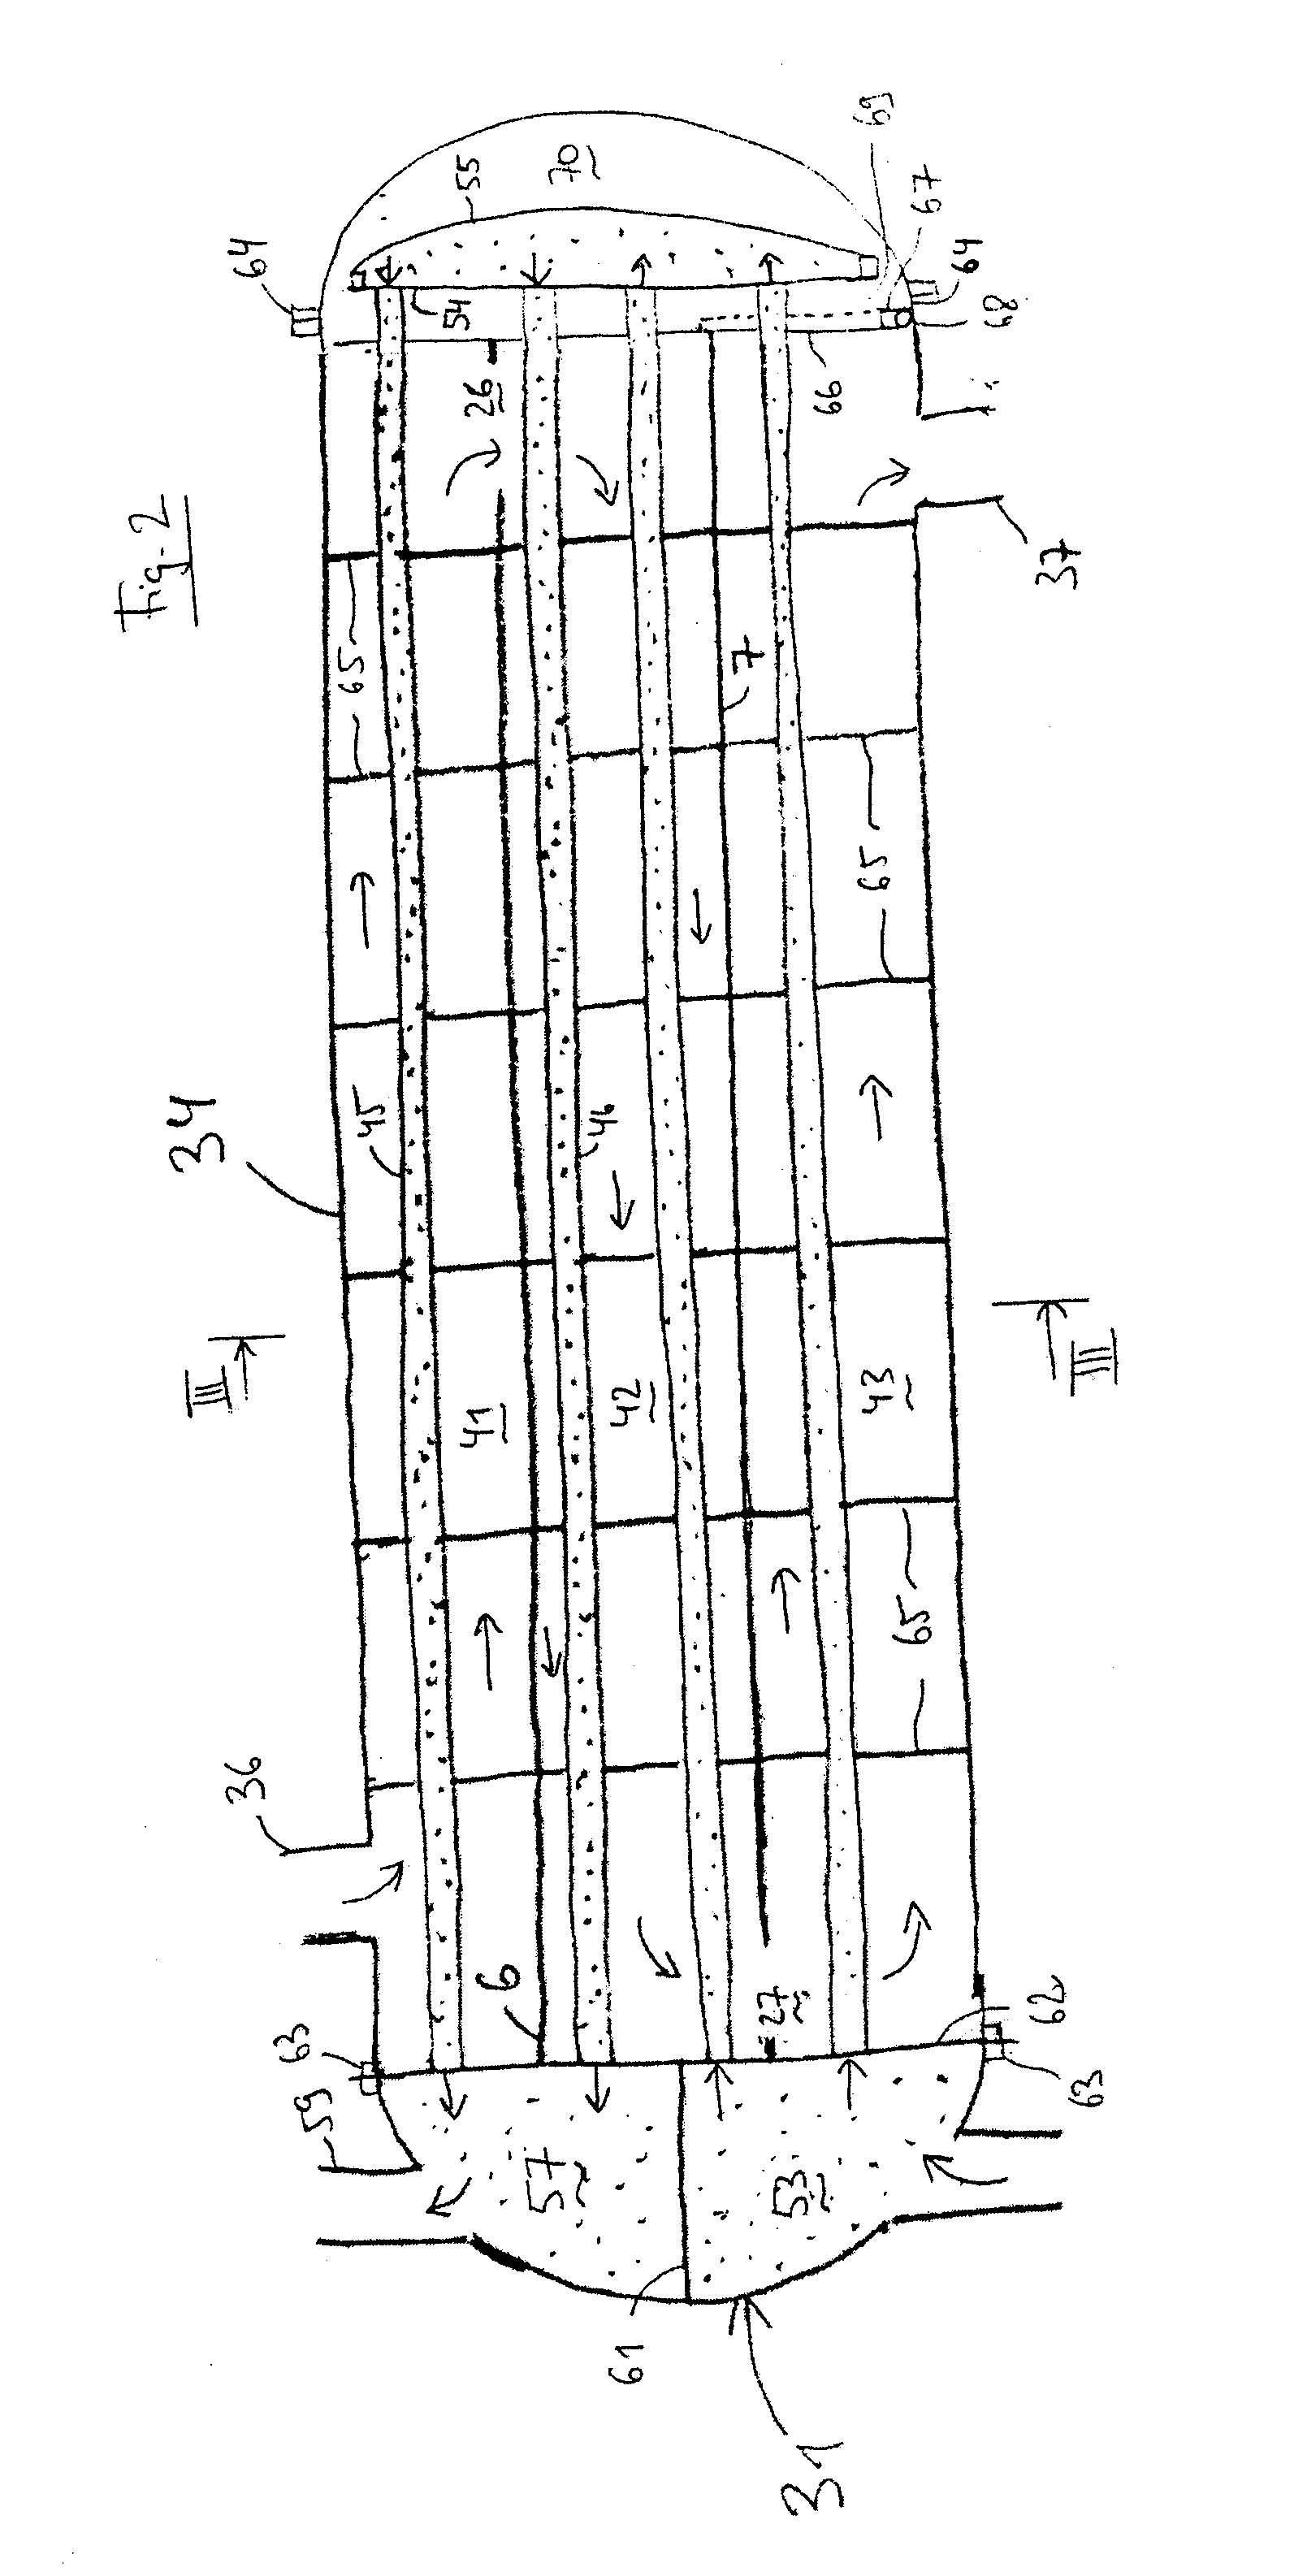 Assembly of baffles and seals and method of assembling a heat exhanger